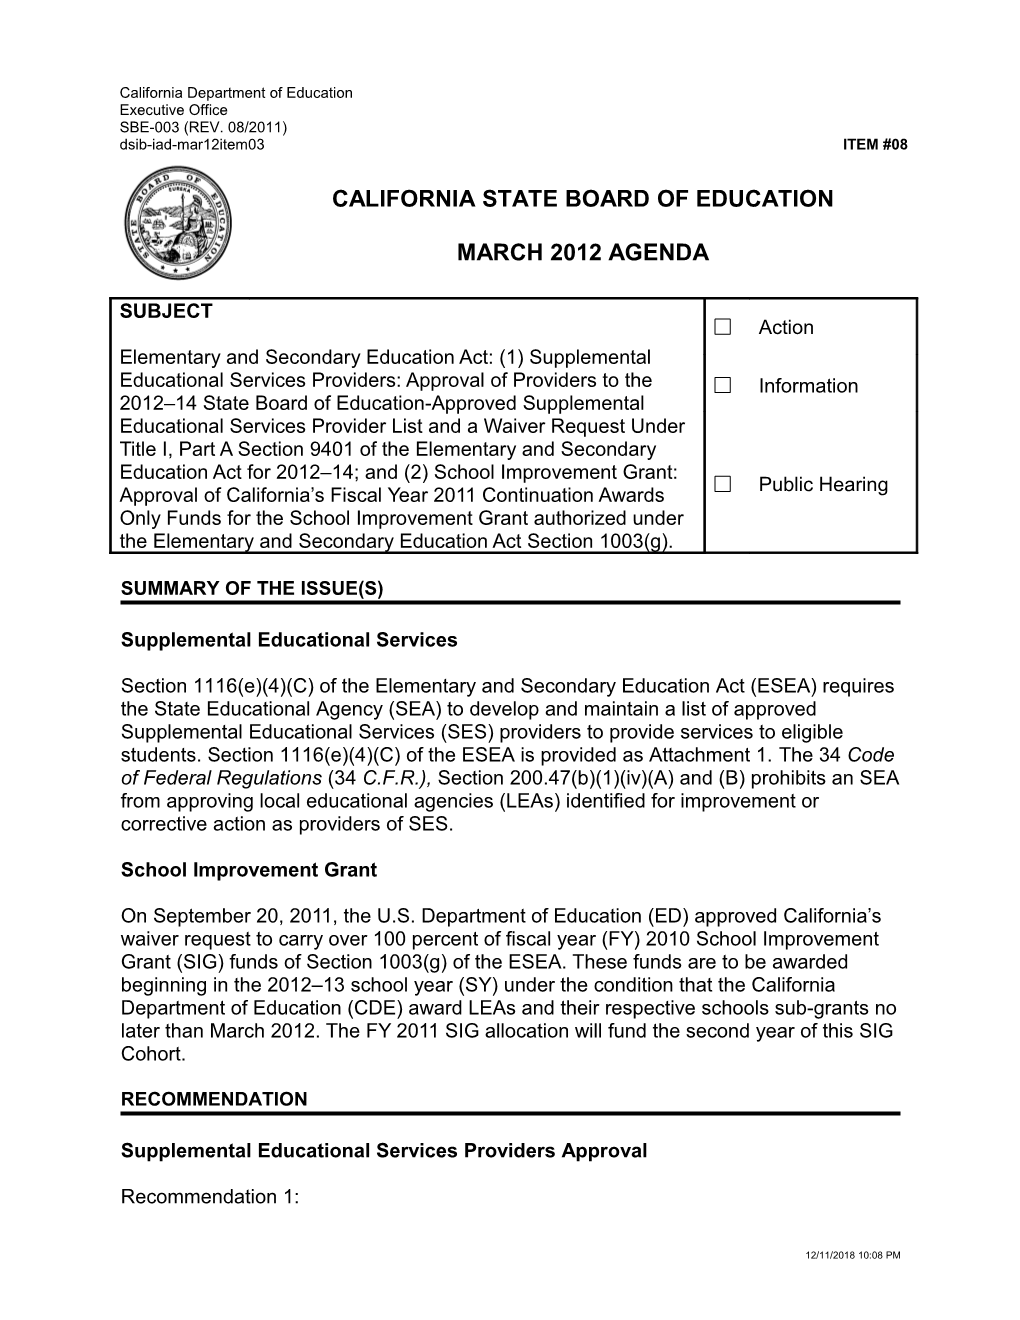 March 2012 Agenda Item 8 - Meeting Agendas (CA State Board of Education)